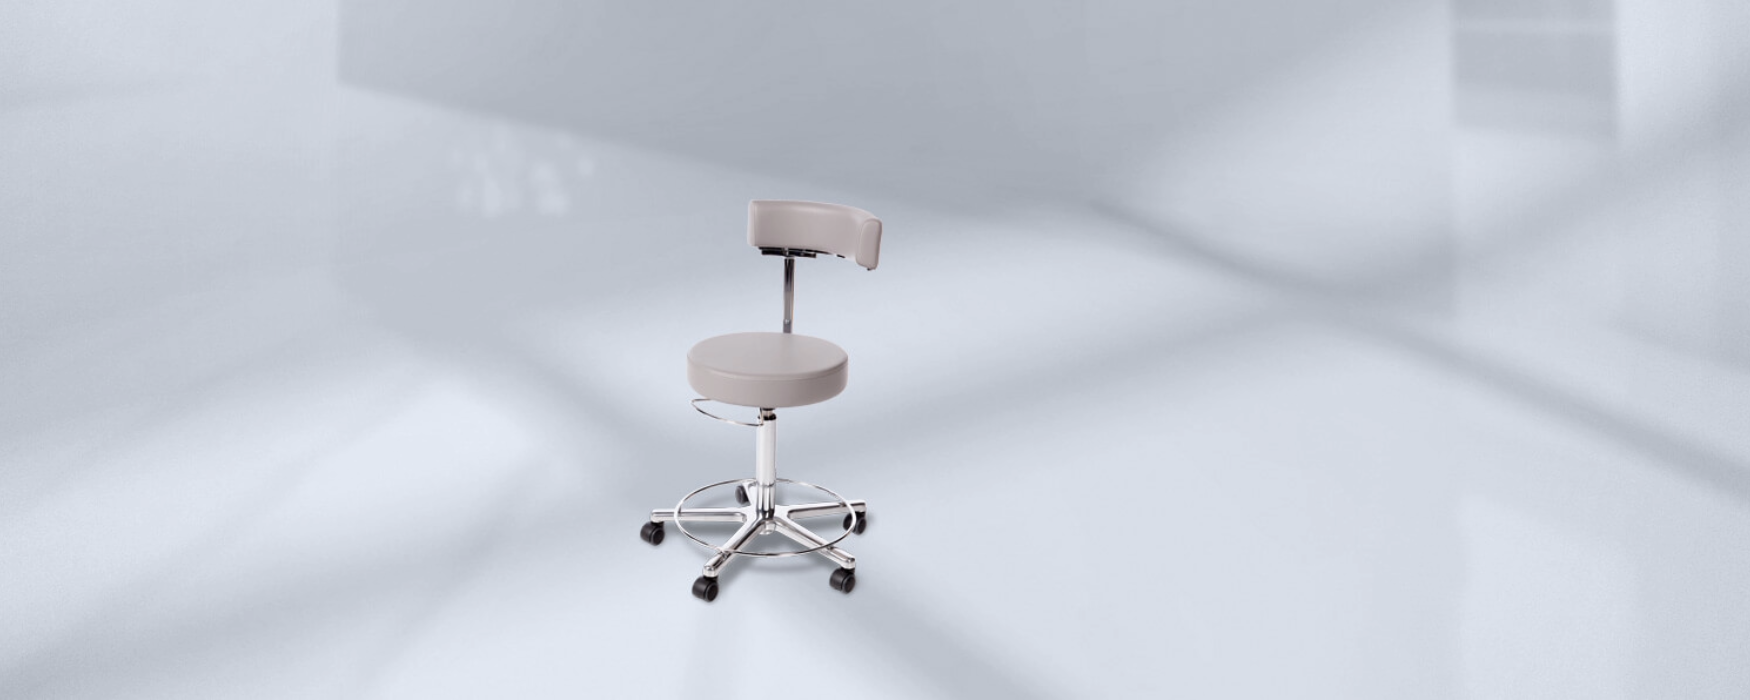 ATMOS Chair Doctor